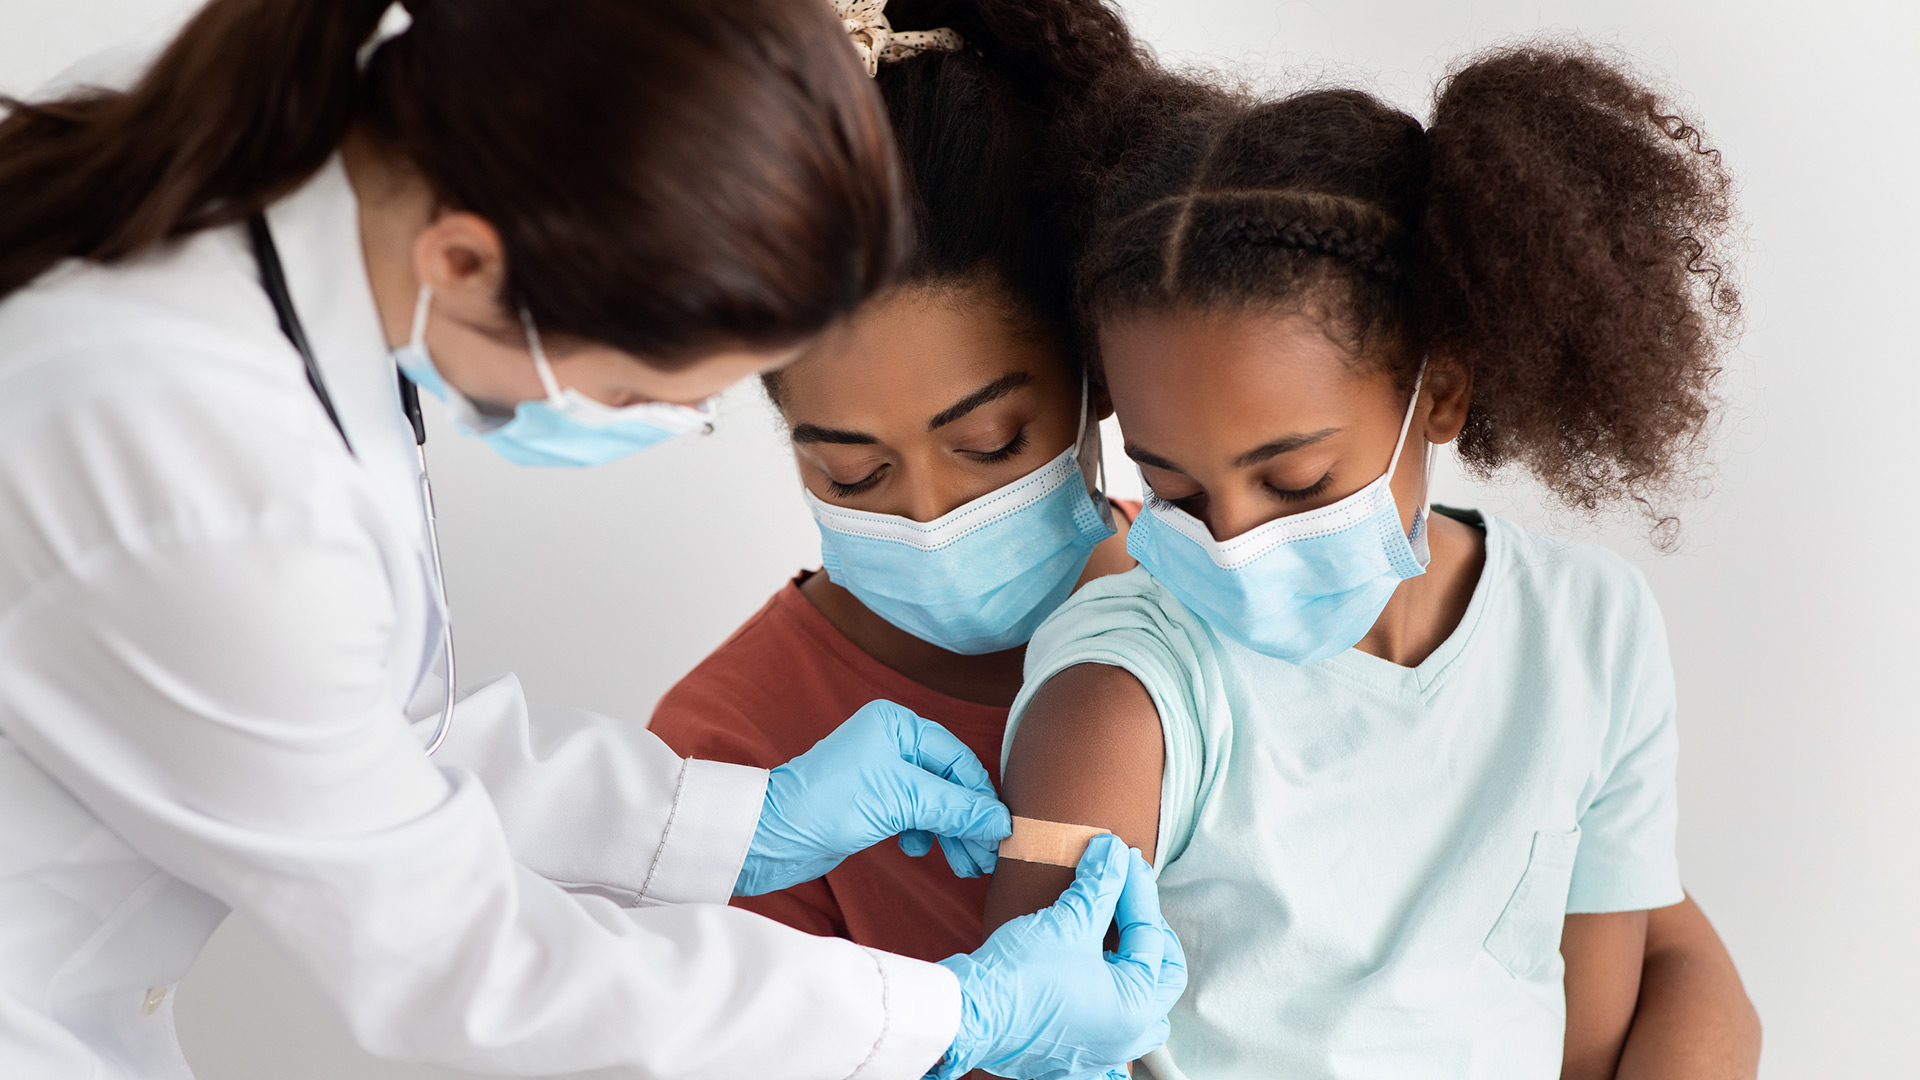 Children tend to have many vaccinations in their younger years – standard immunizations, flu shots, and now COVID-19 vaccines as well. And while getting shots is likely not your child’s favorite activity, they are necessary to keep children safe and healthy. 